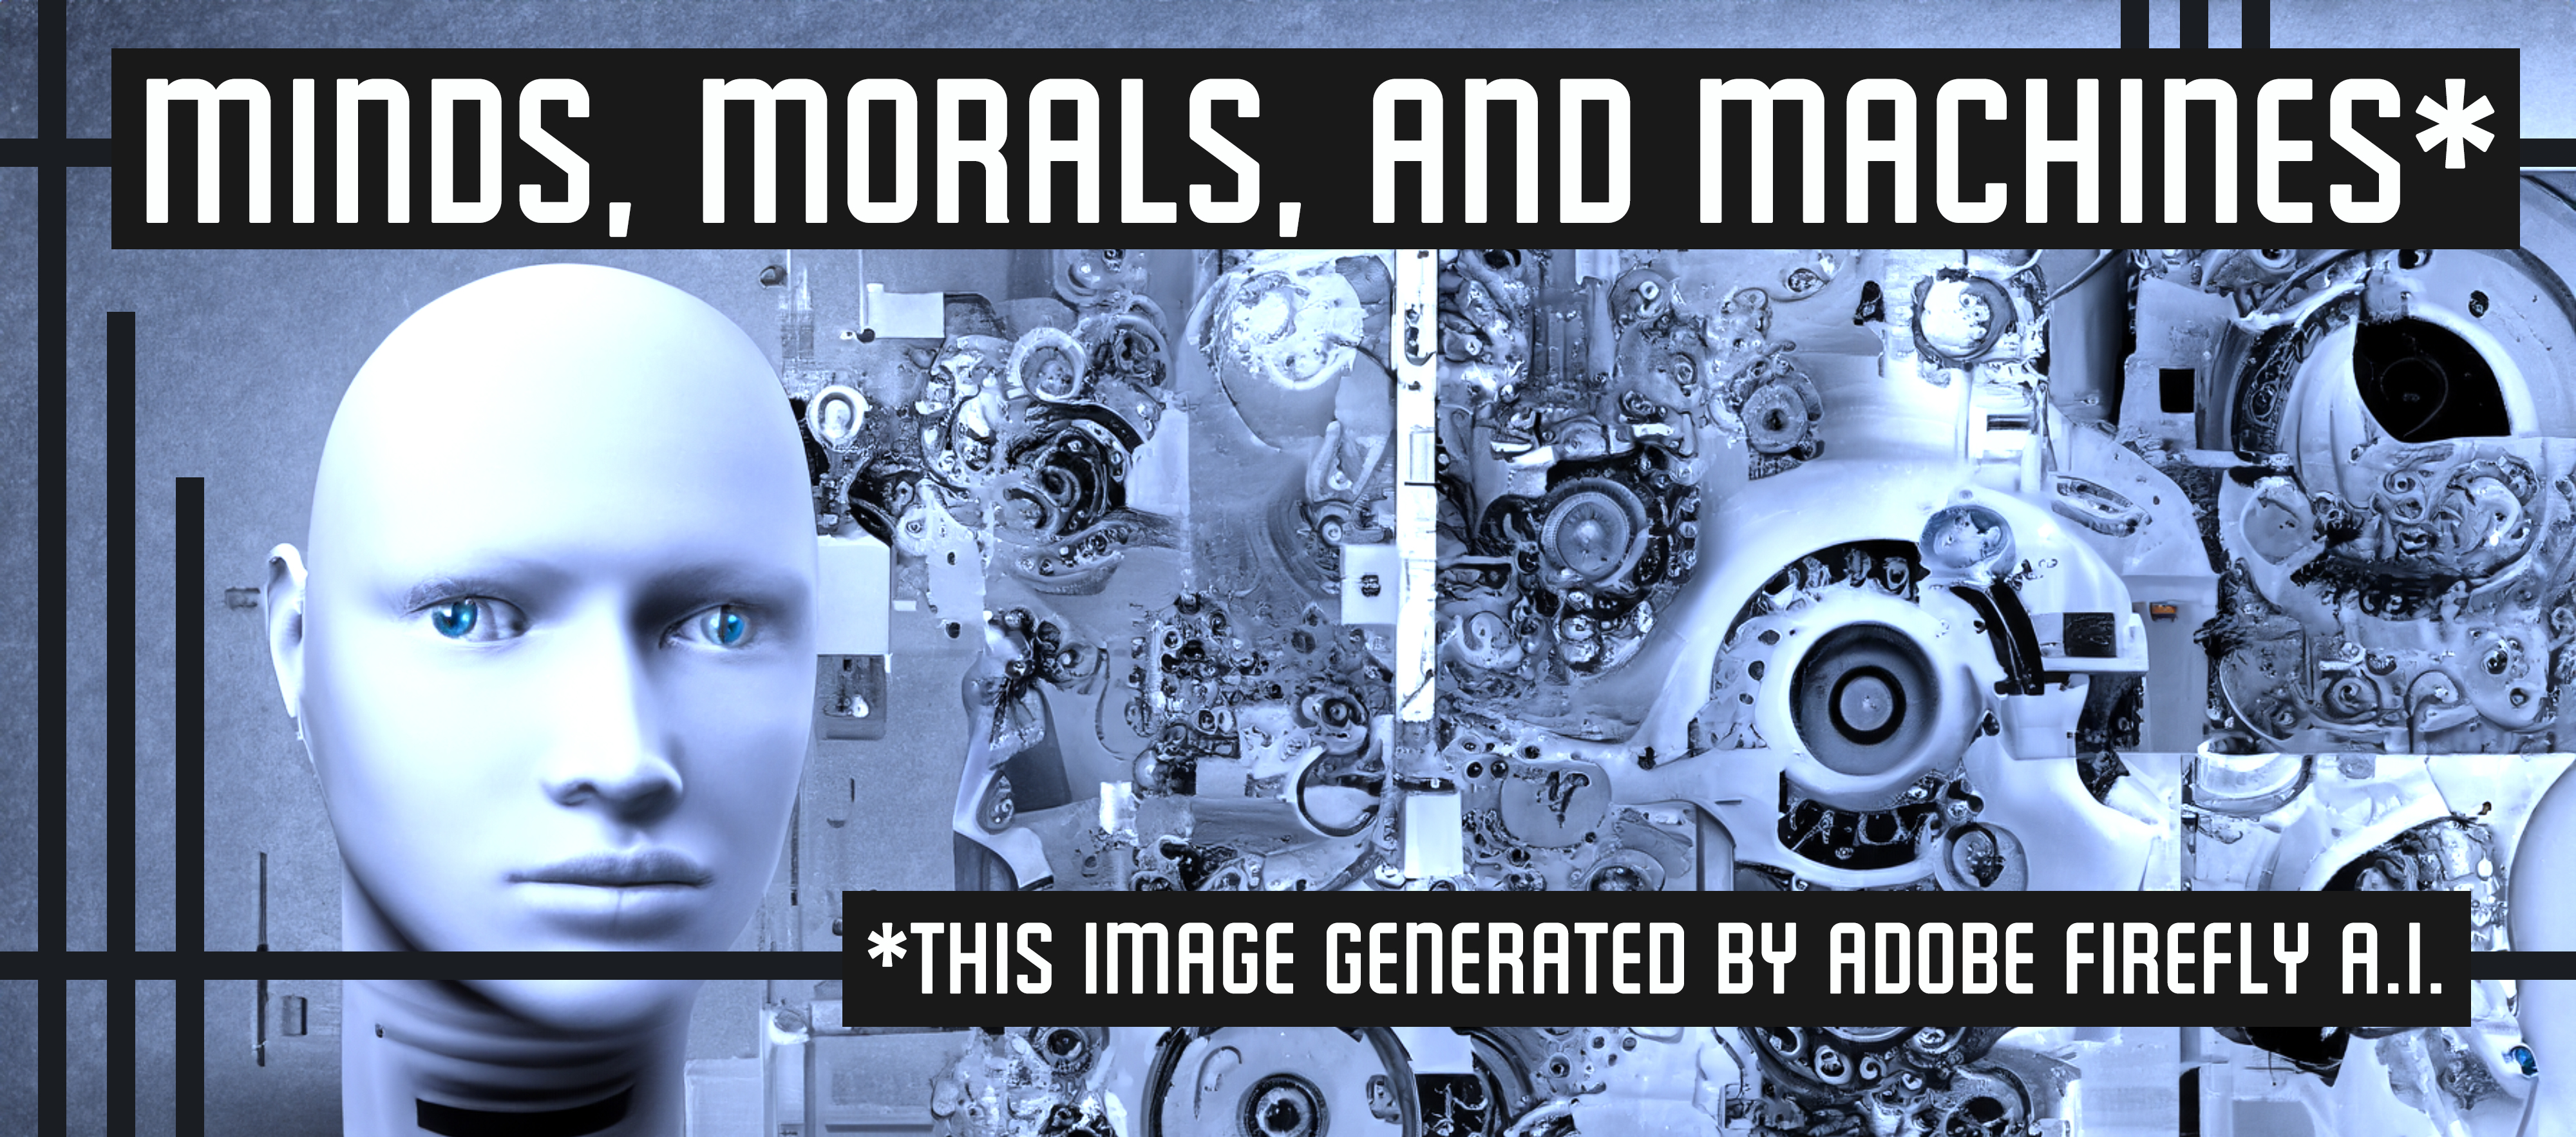 Minds, Morals, and Machines